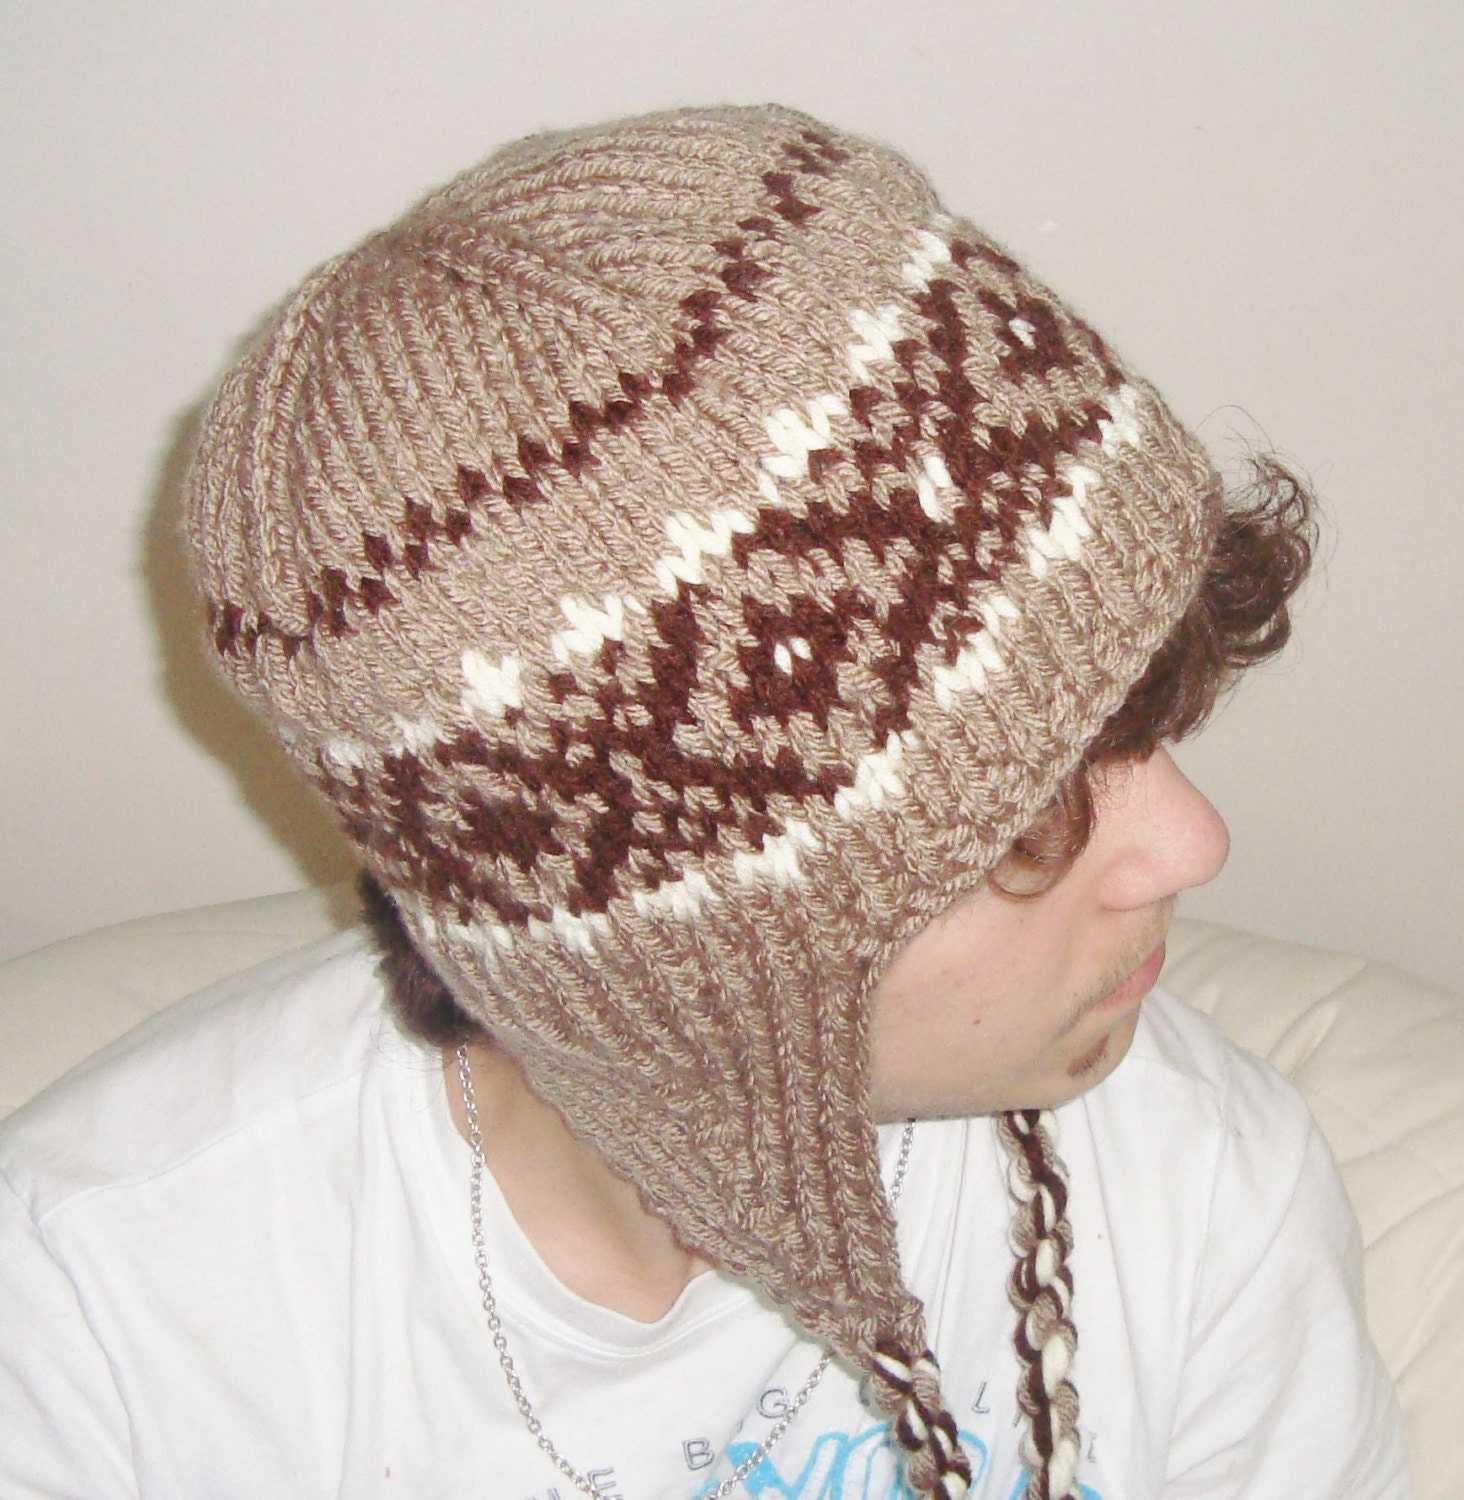 Wooly Mens Hats Winter with Ear Flaps Knits Warm Beige Brown Etsy